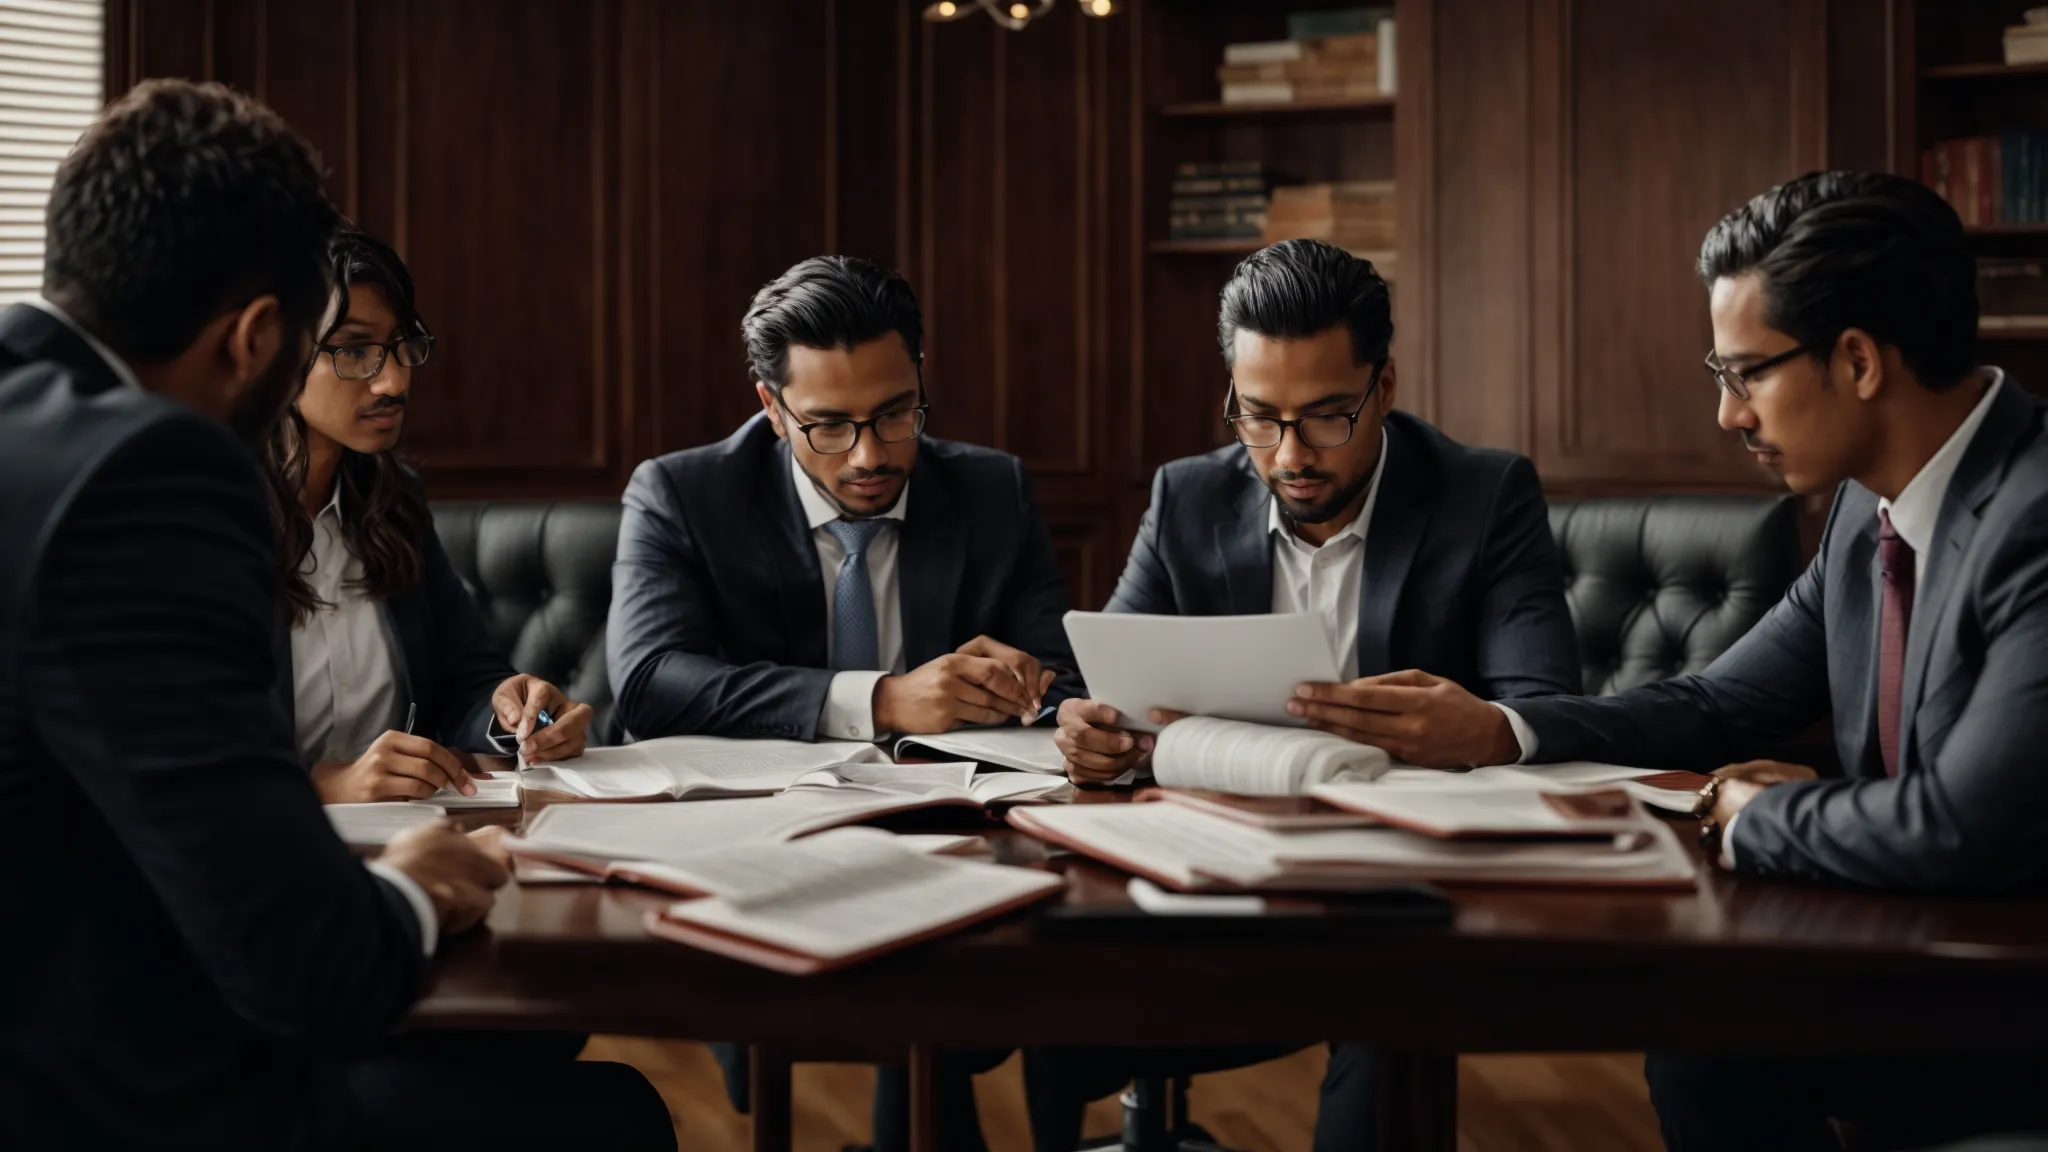 a group of entrepreneurs gathered around a conference table, deeply engrossed in discussion with legal books and documents scattered in front of them.